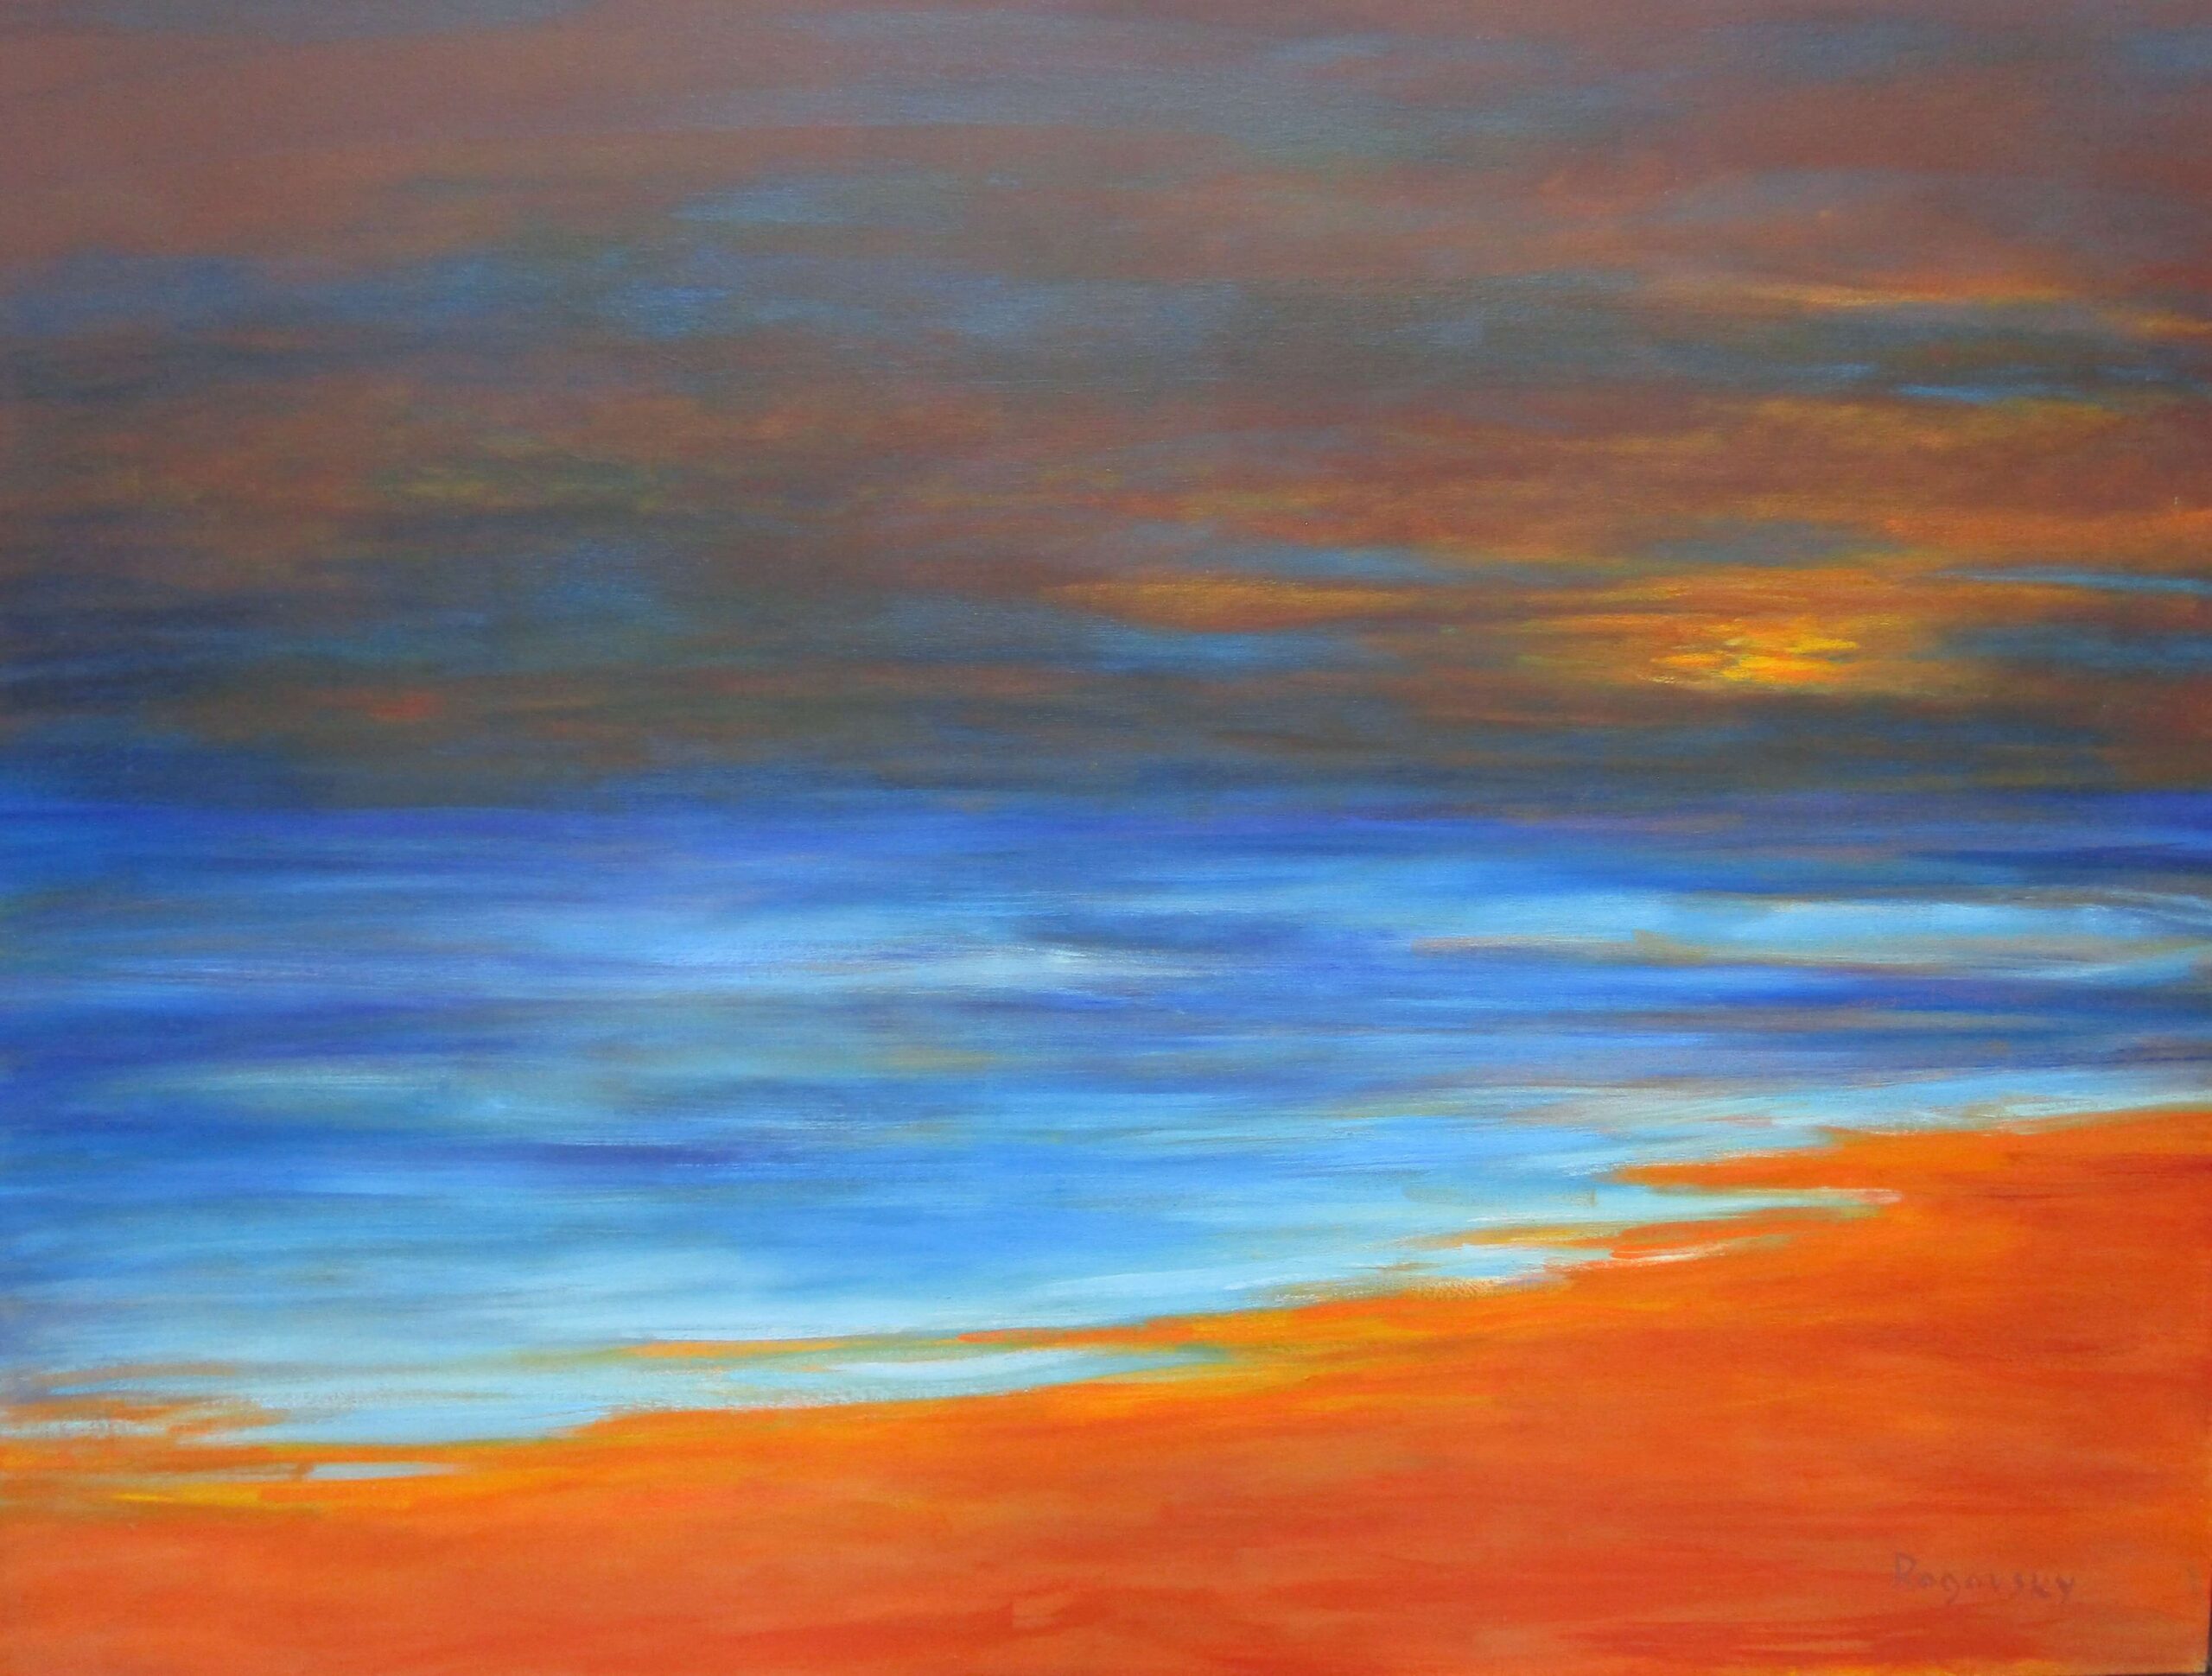 Sky Glow, Oil on Canvas - Land and Sea